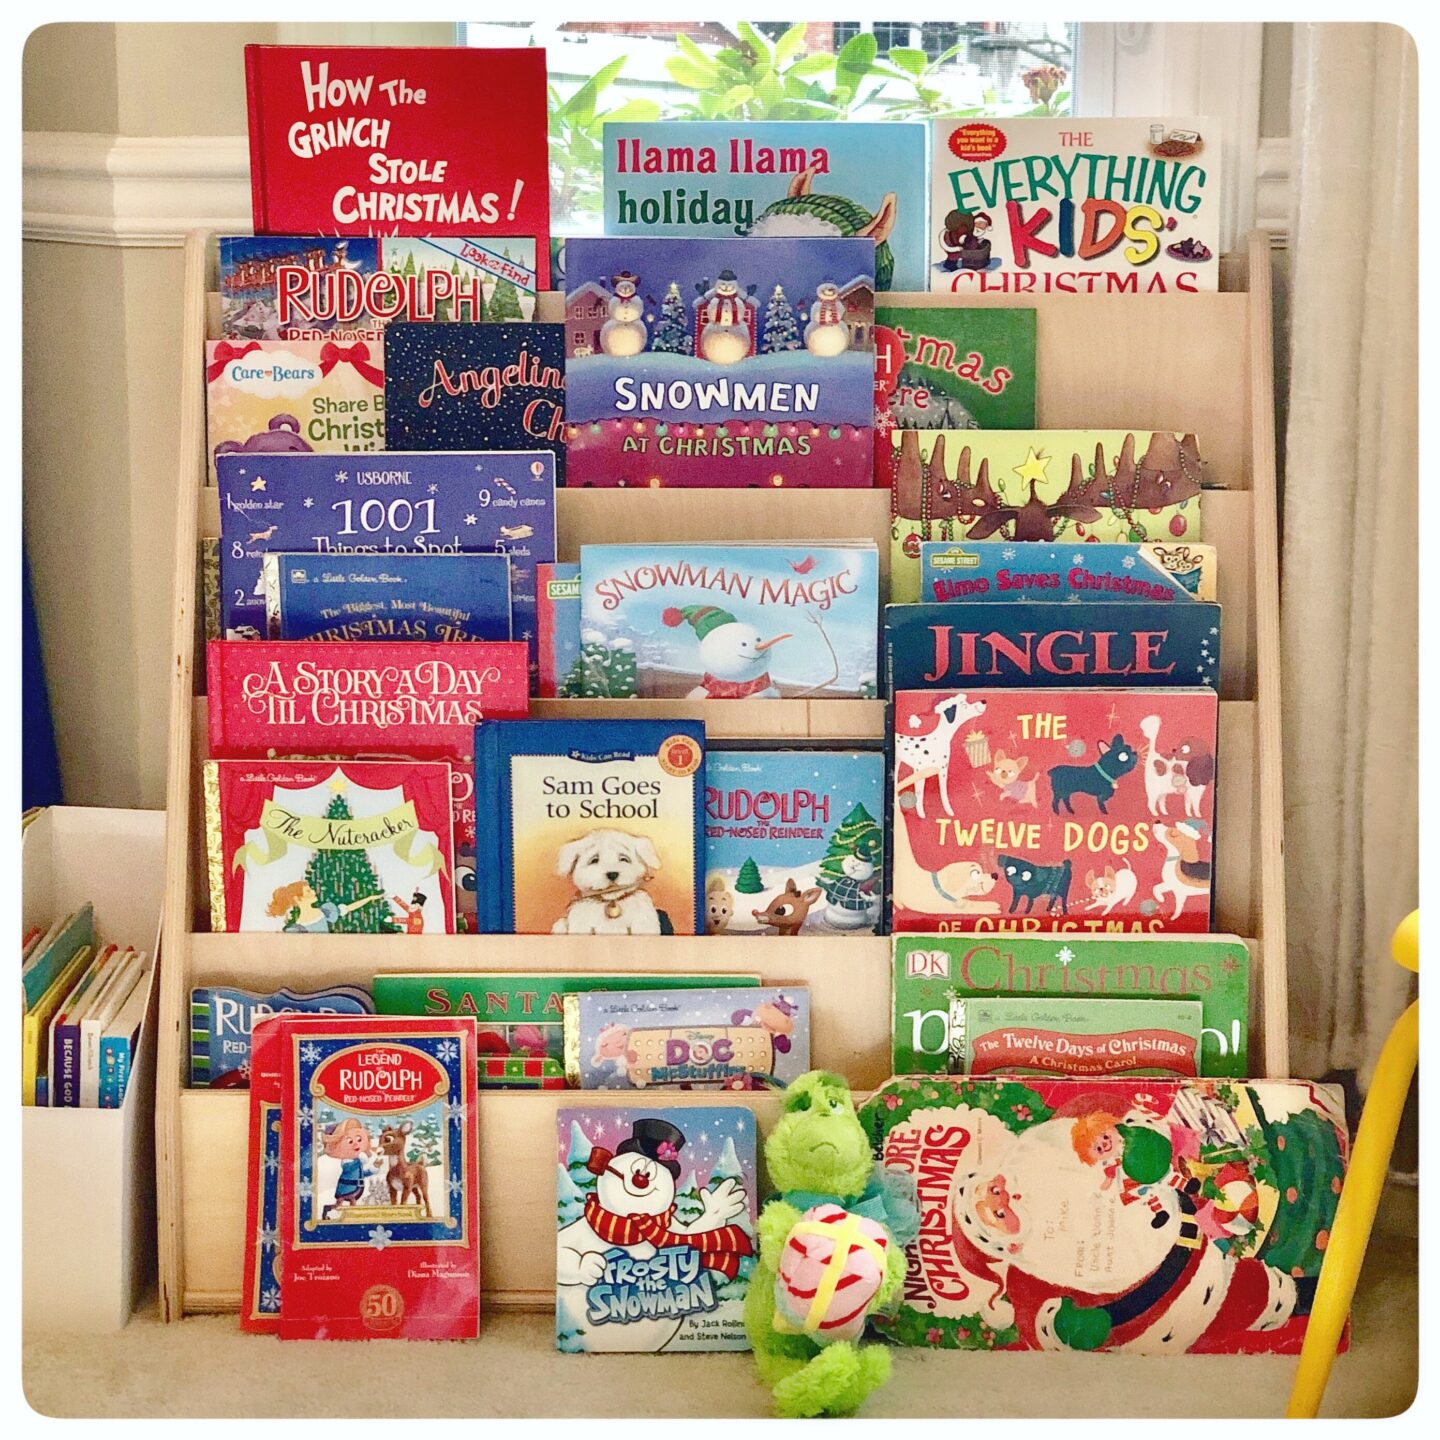 Here are some of our Favorite Christmas Holiday books